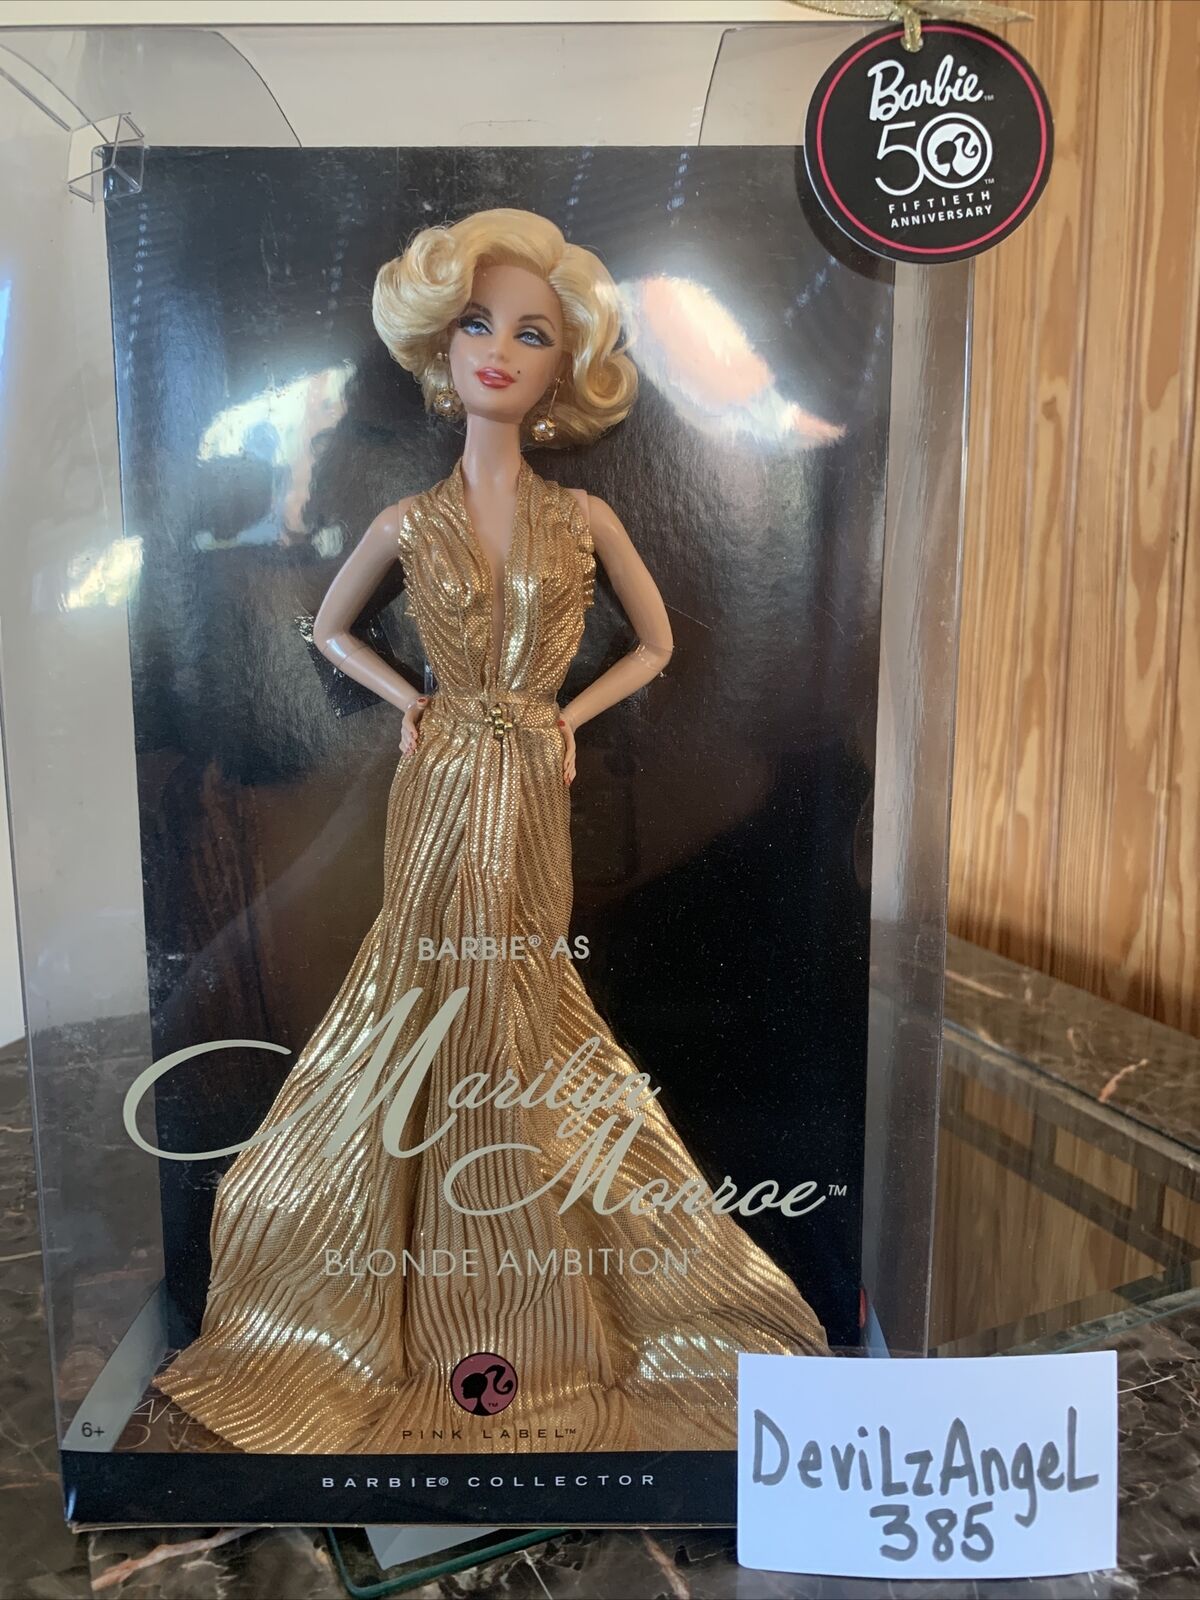 50th Anniversary Barbie As Marilyn Monroe Blonde Ambition Pink Label